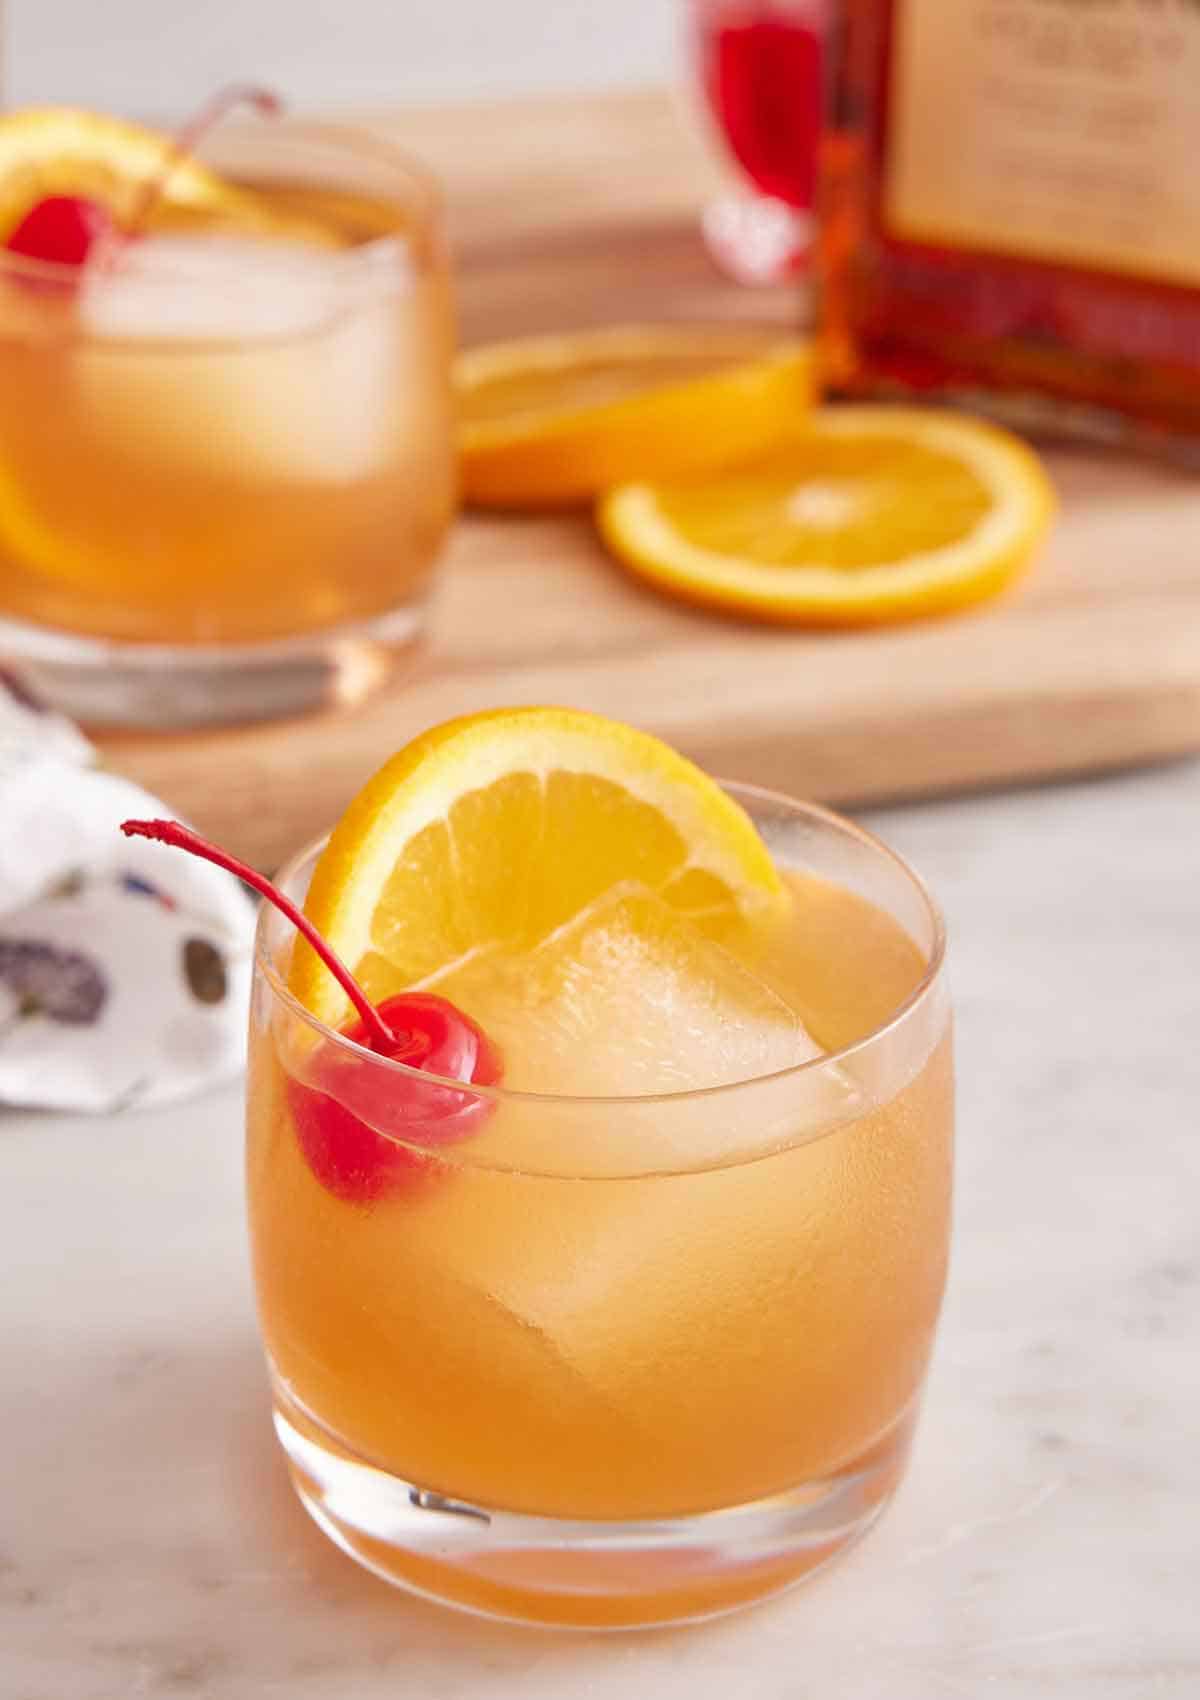 A glass of Amaretto Sour with a second one in the background along with orange slices.